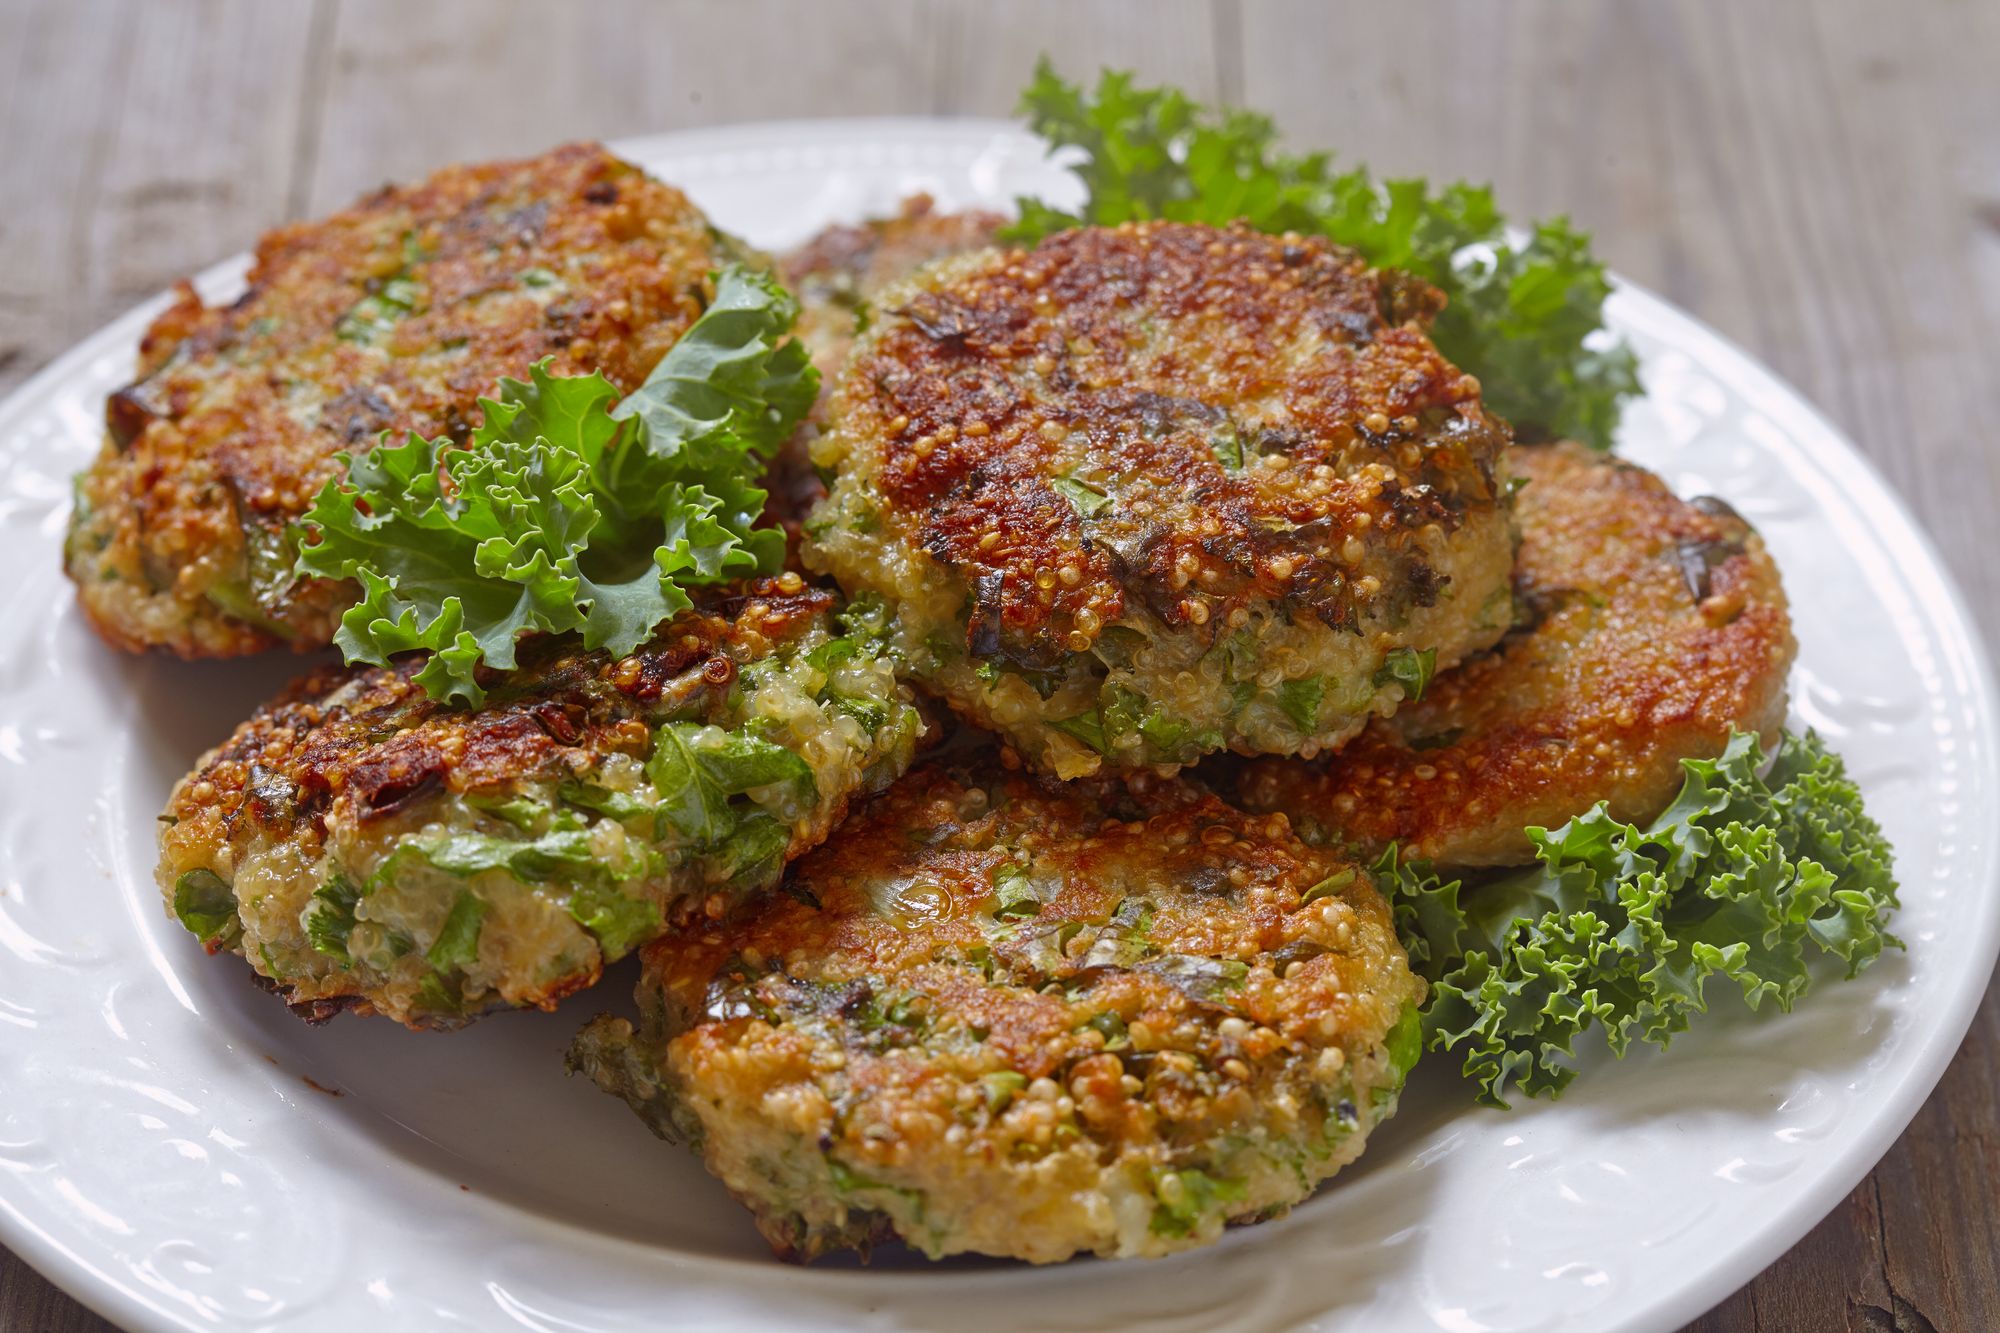 Kale and Feta Fritters